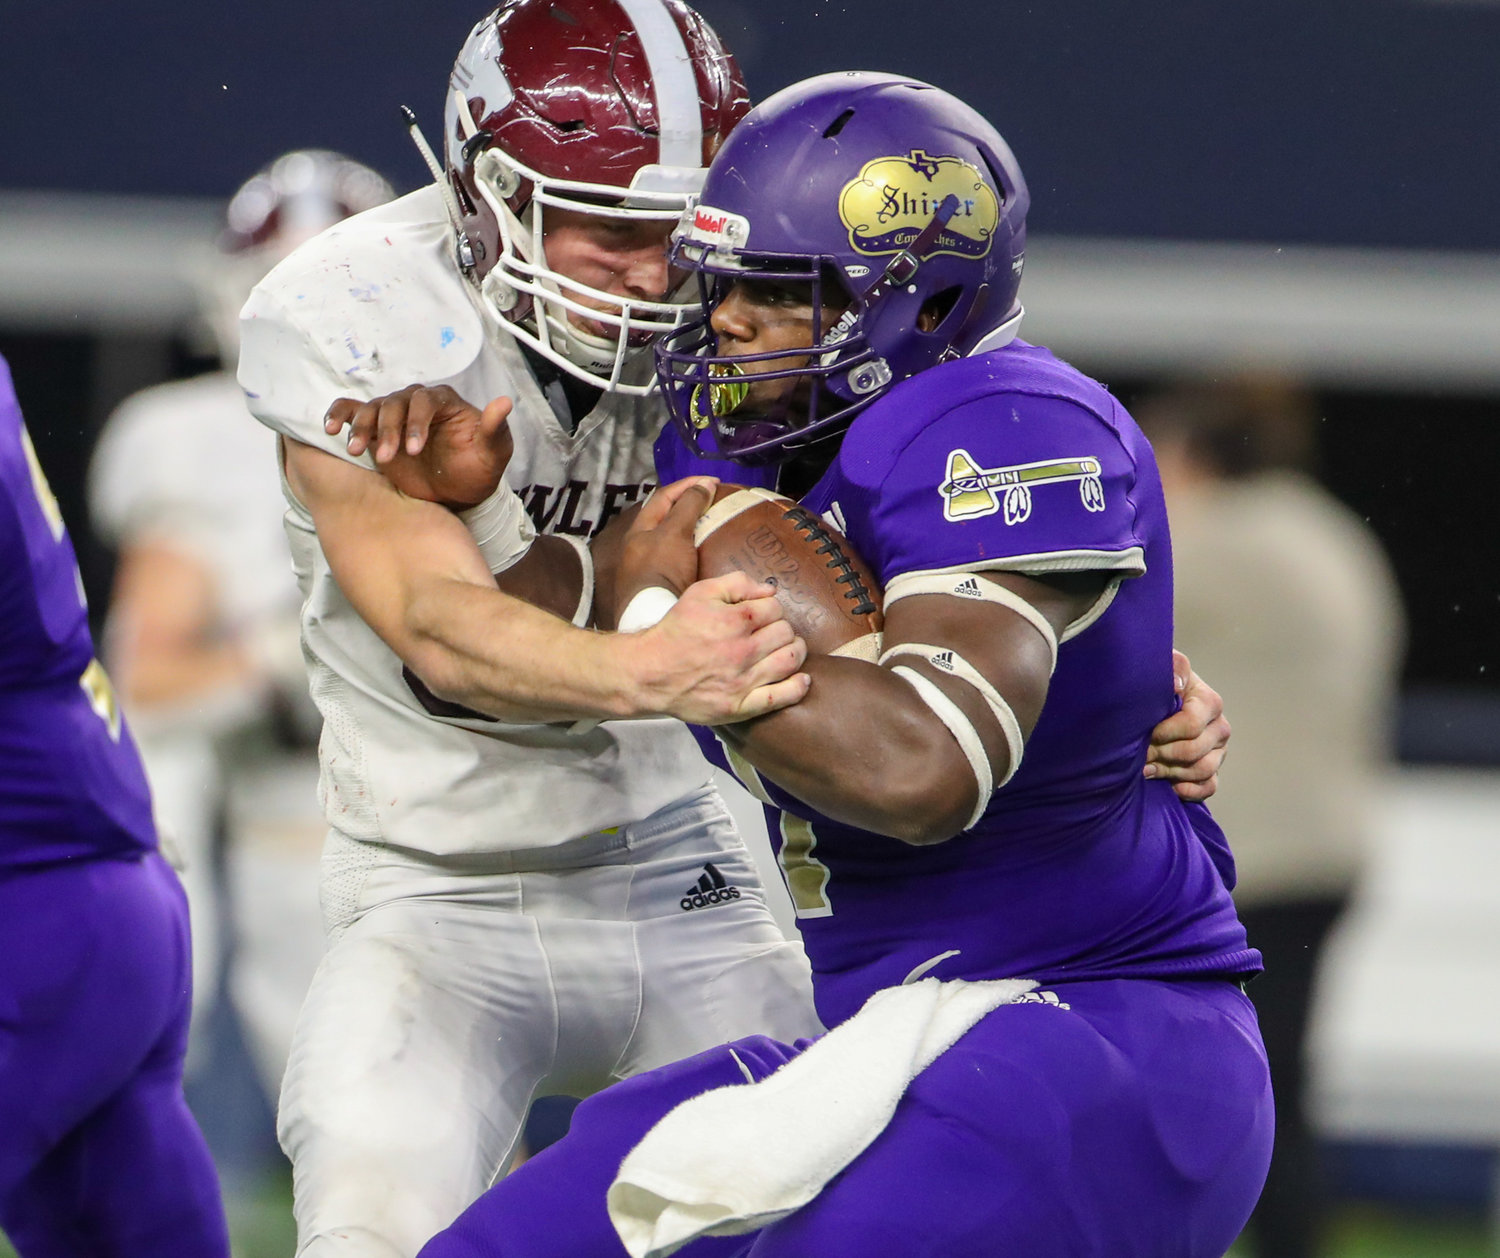 Shiner Comanches senior Doug Brooks (1) is wrapped up on a carry during the Class 2A Division I state football championship game between Shiner and Hawley on December 15, 2021 in Arlington, Texas.